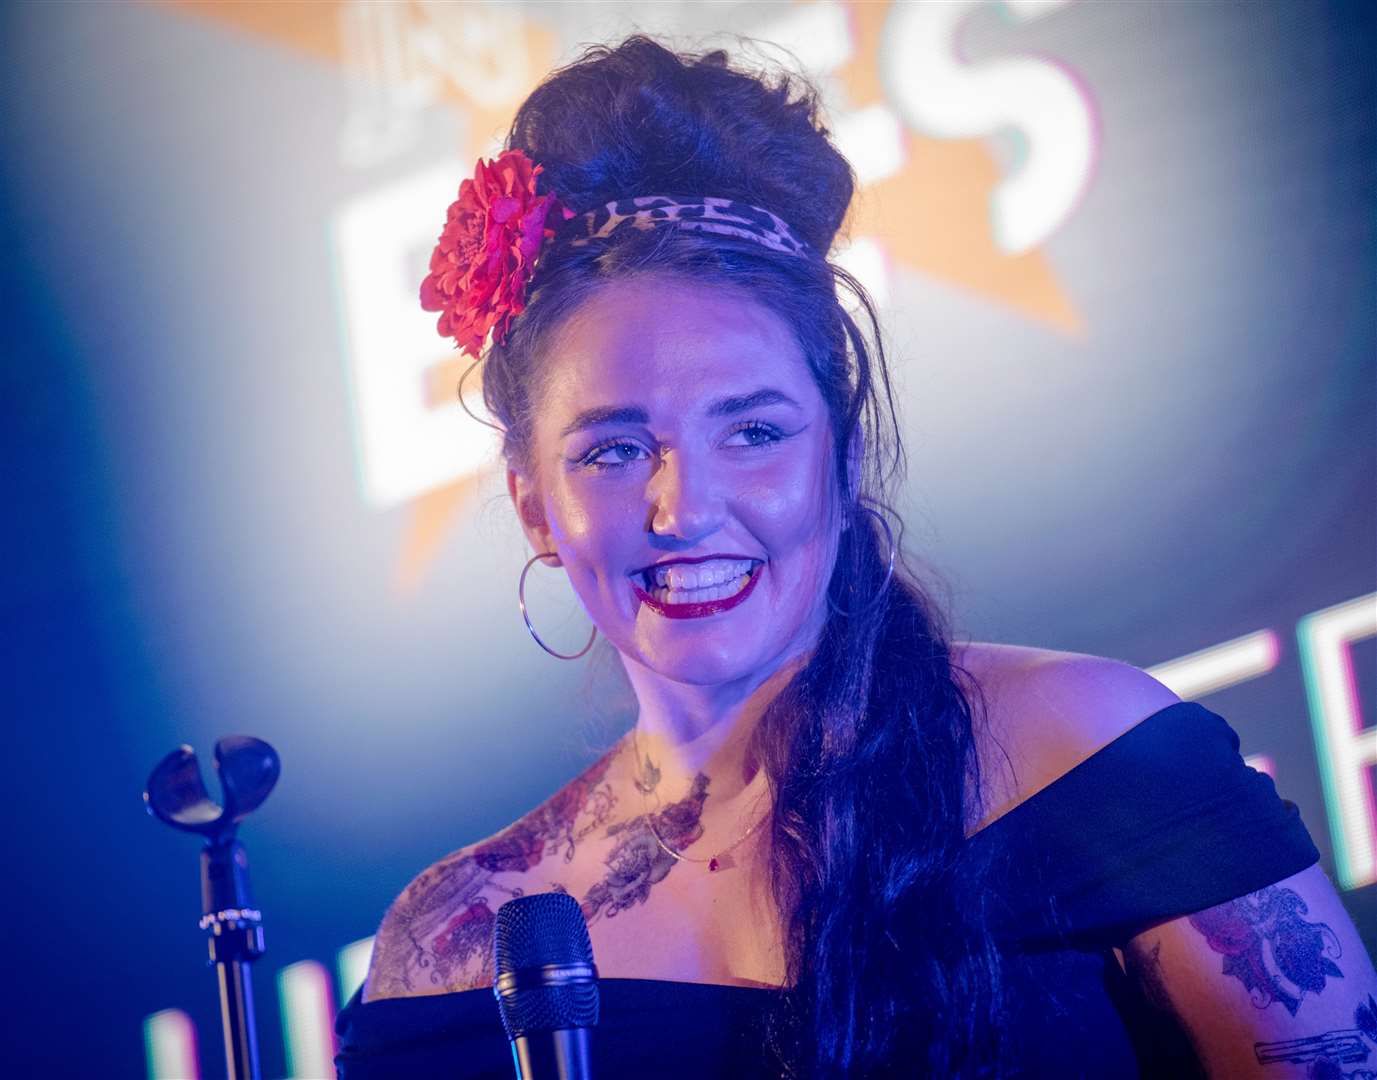 Contest winner Heather Davidson performed Amy Winehouse's You Know I'm No Good. Picture: Callum Mackay